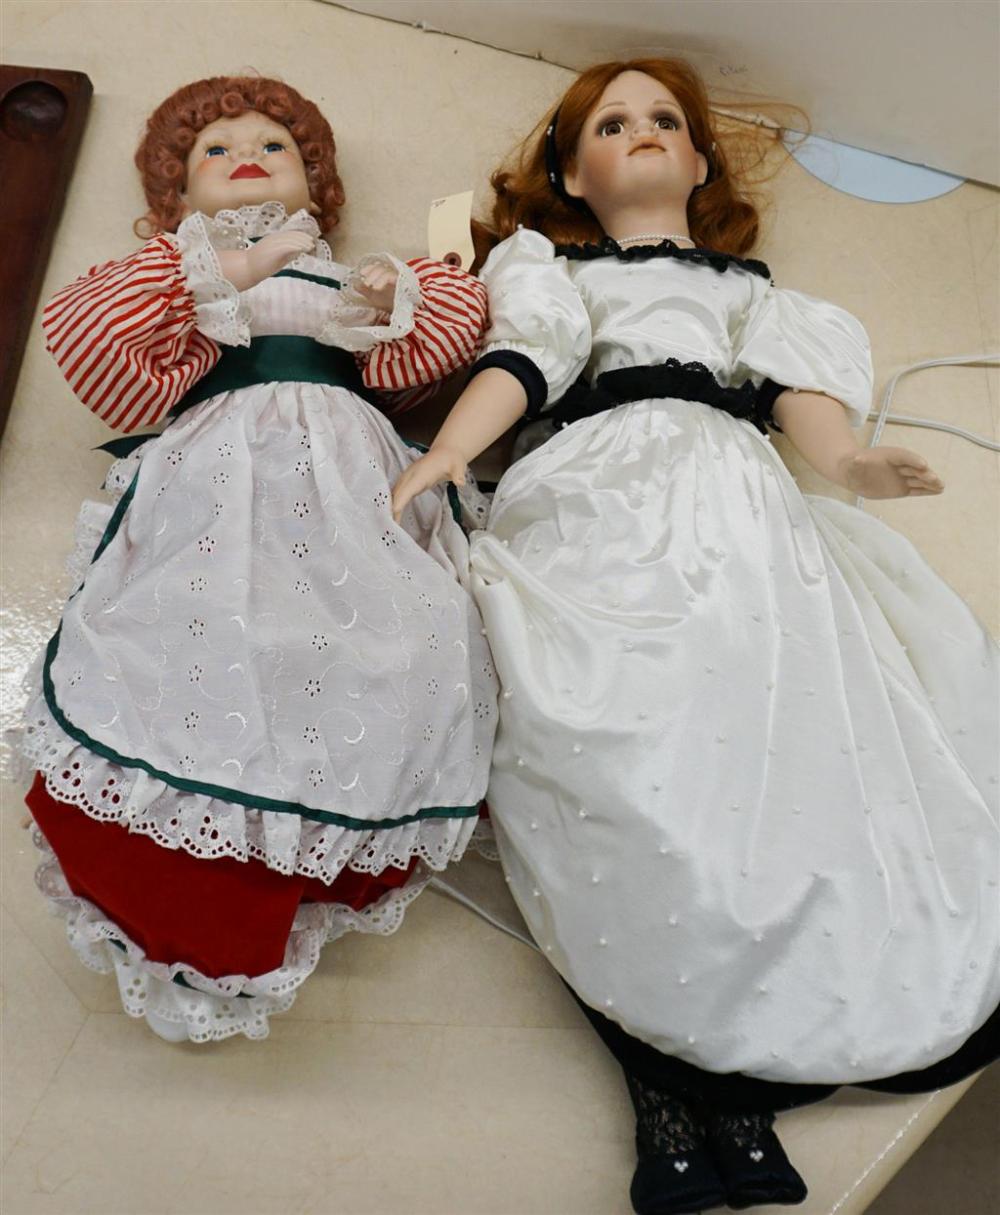 TWO PORCELAIN HEAD DOLLS H OF 3282a4